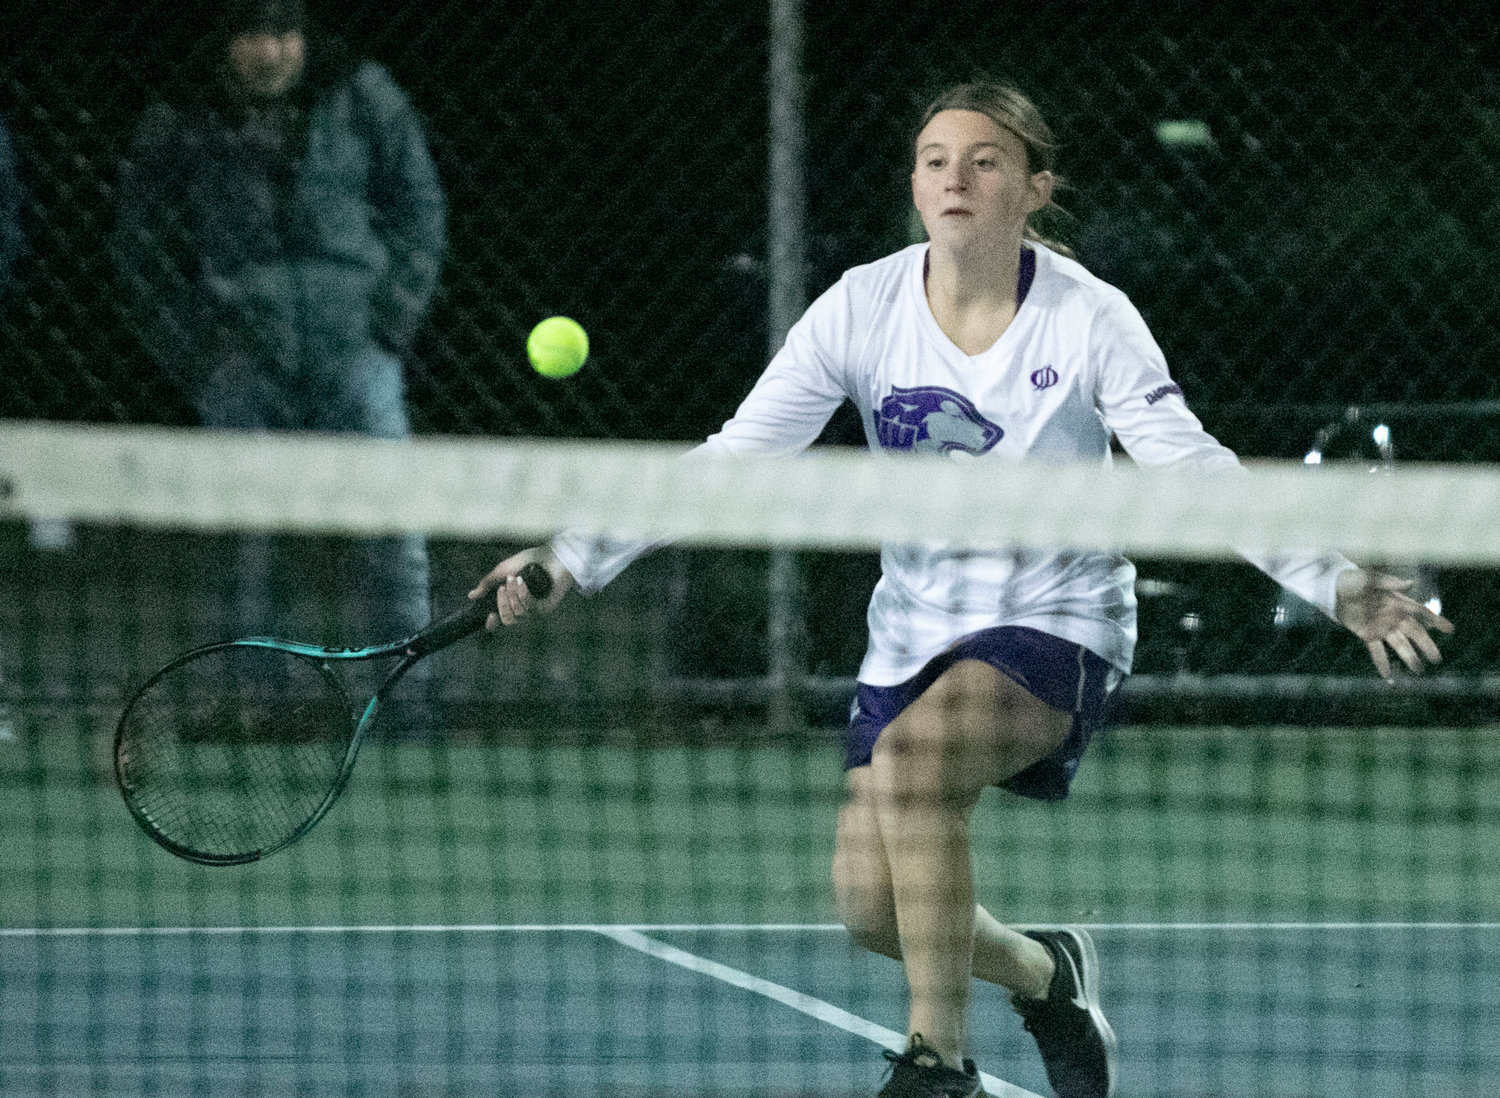 Huskies third doubles team Sydney DiChiappari and Siena Sousa, lost their match to Prout’s Cat Wanta and Lena Eng, in straight sets, 6-1, 6-4.